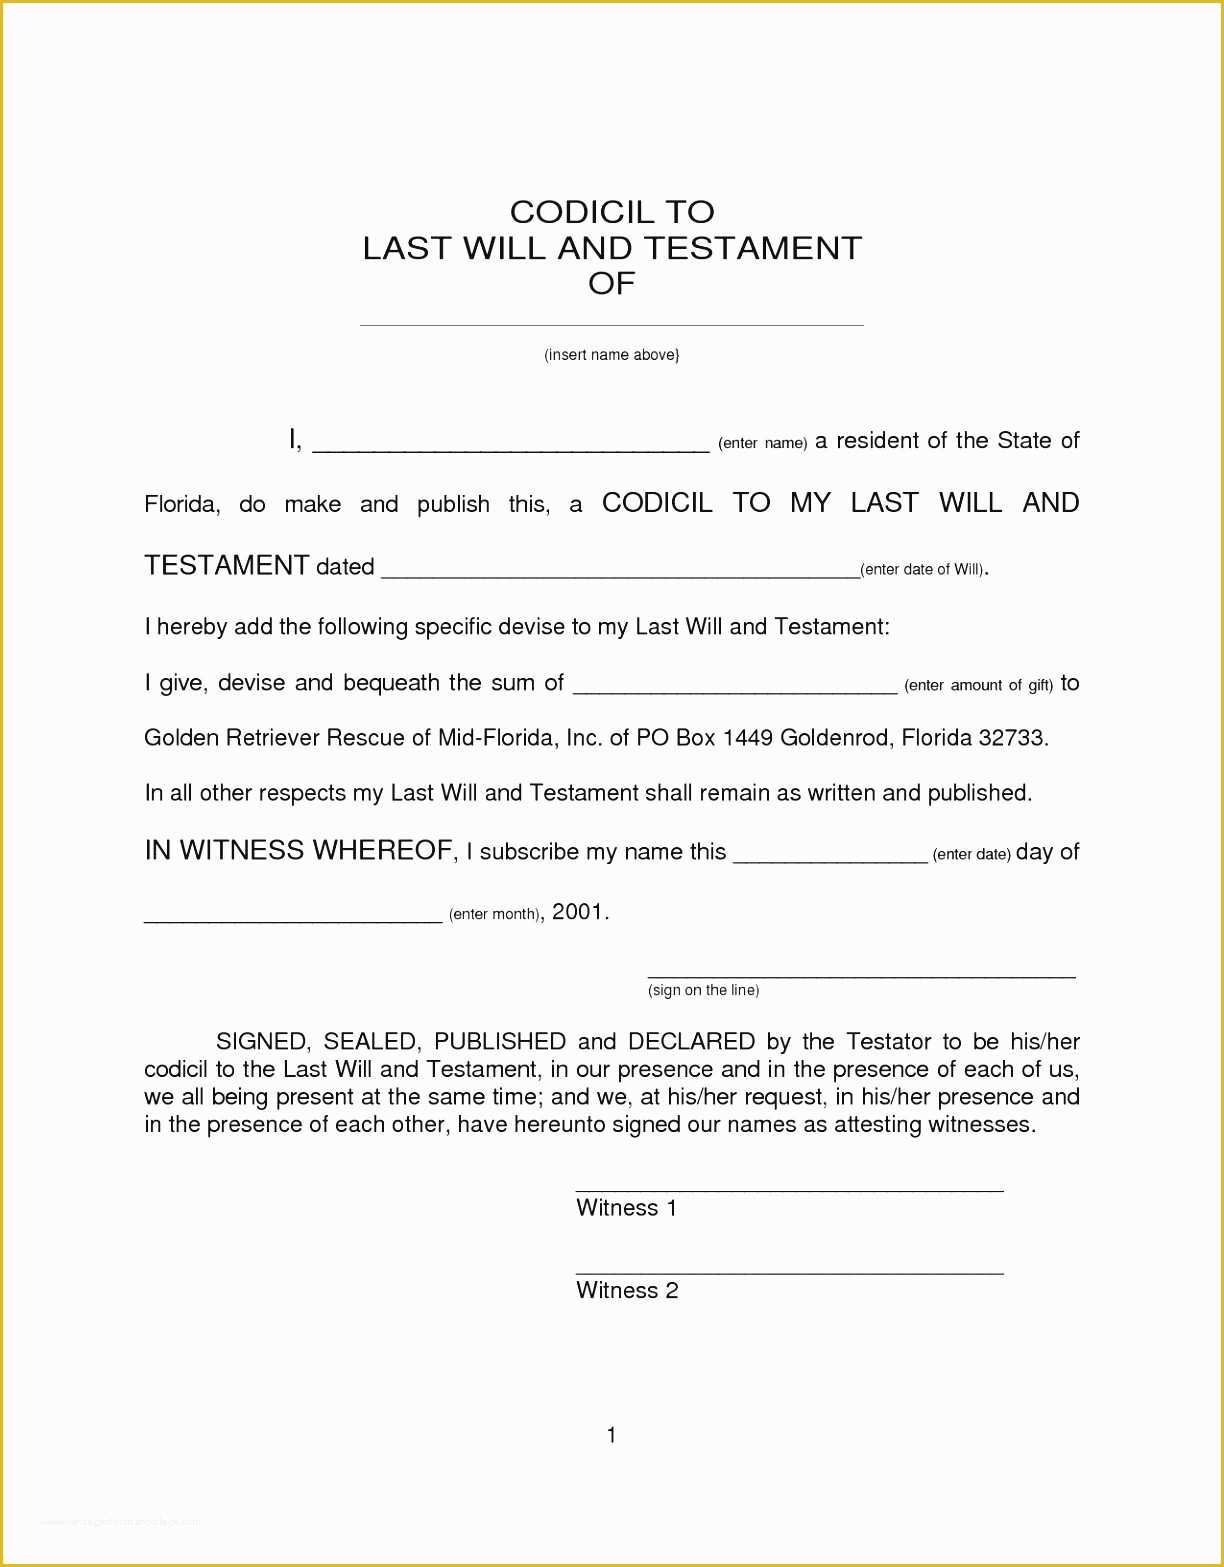 Last Will and Testament Texas Free Template Of Beautiful Last Will and Testament Template Texas Pdf